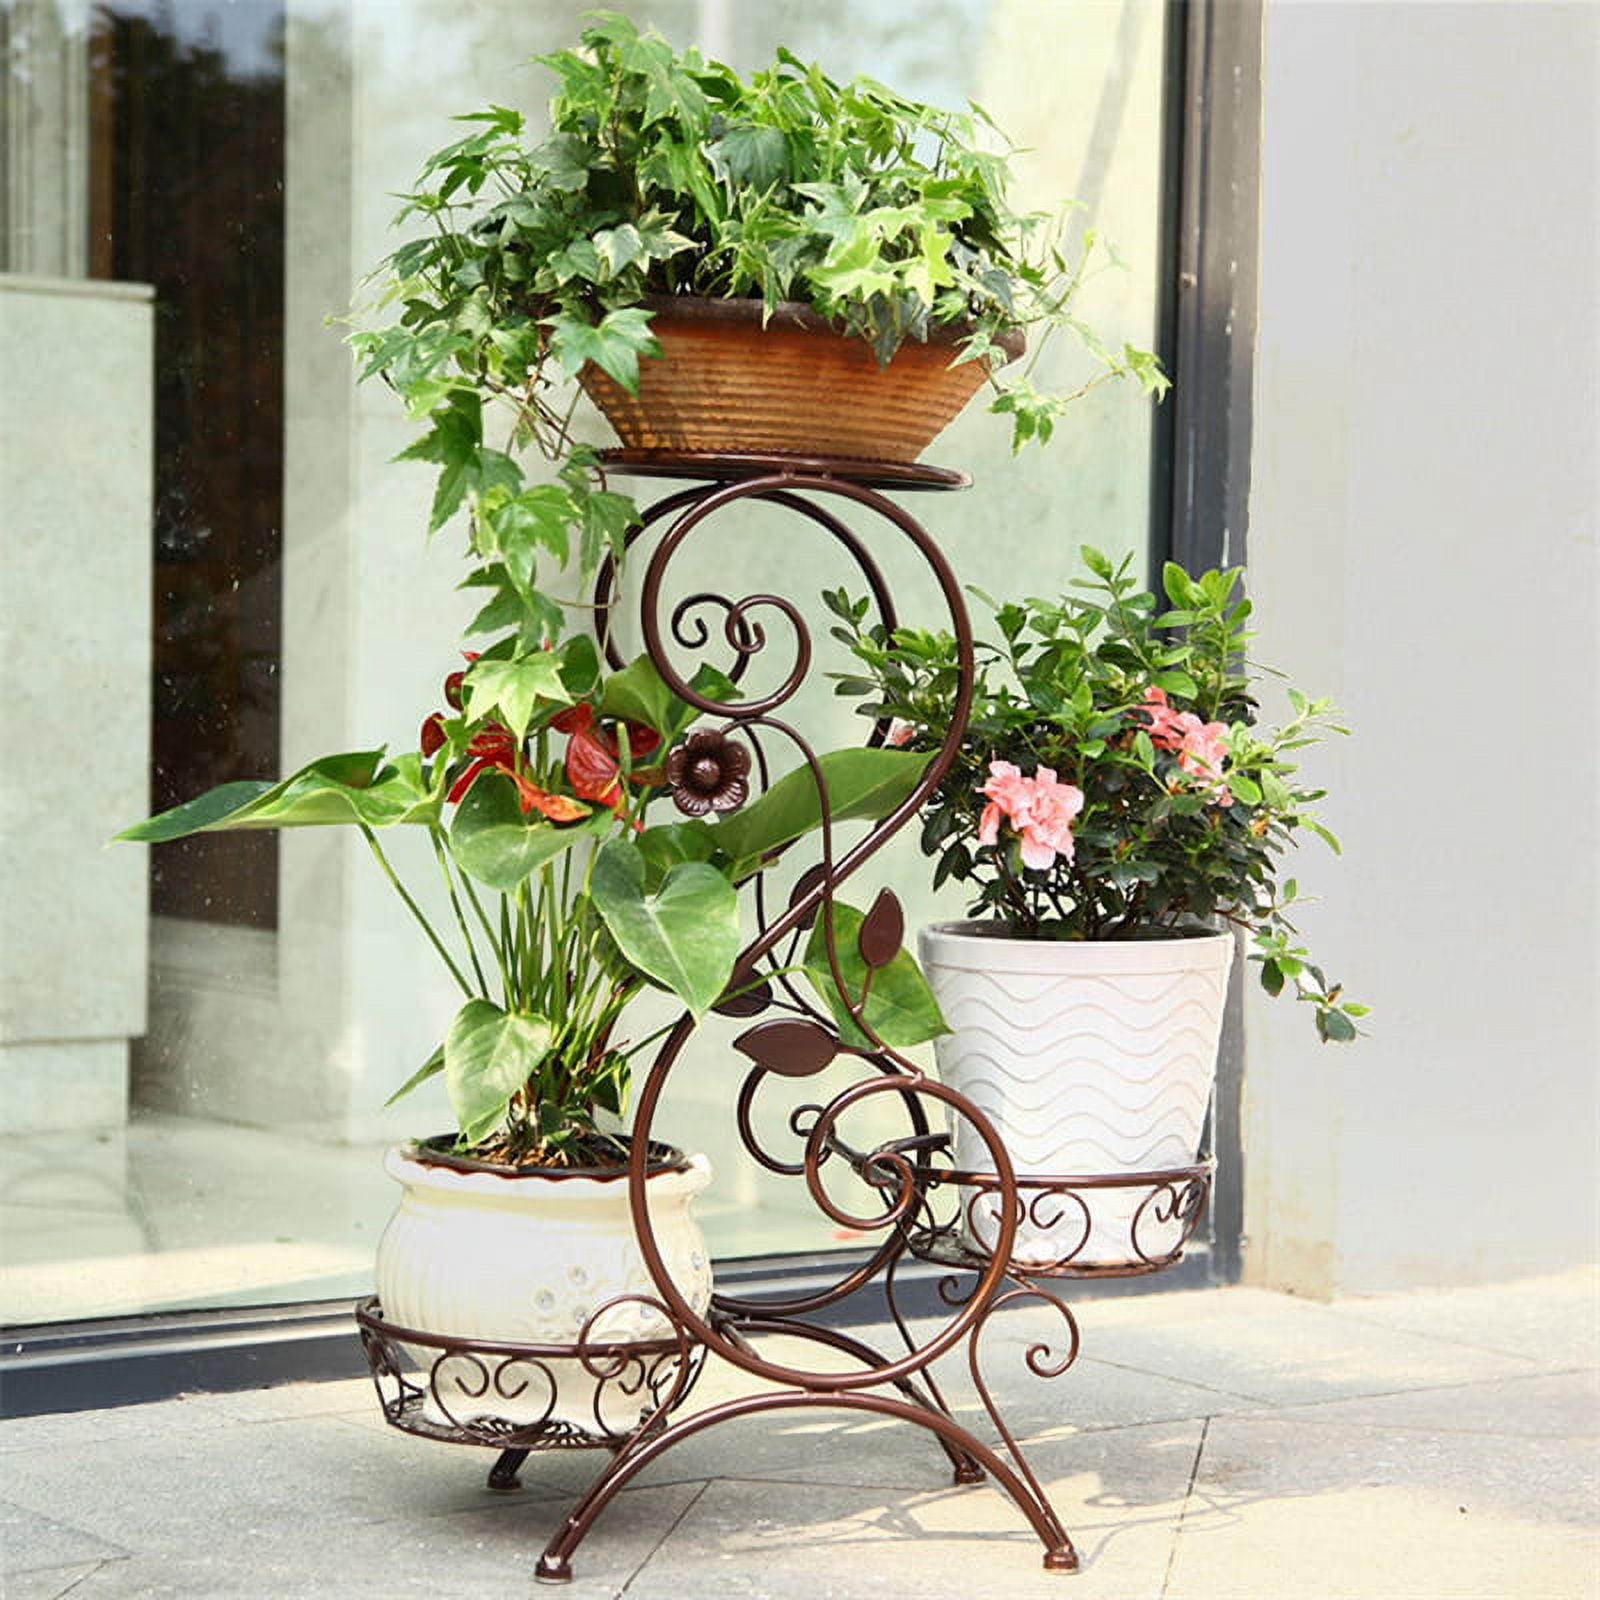 Versailles Metal 4 Tier Rack- Ideal as a plant stand or general